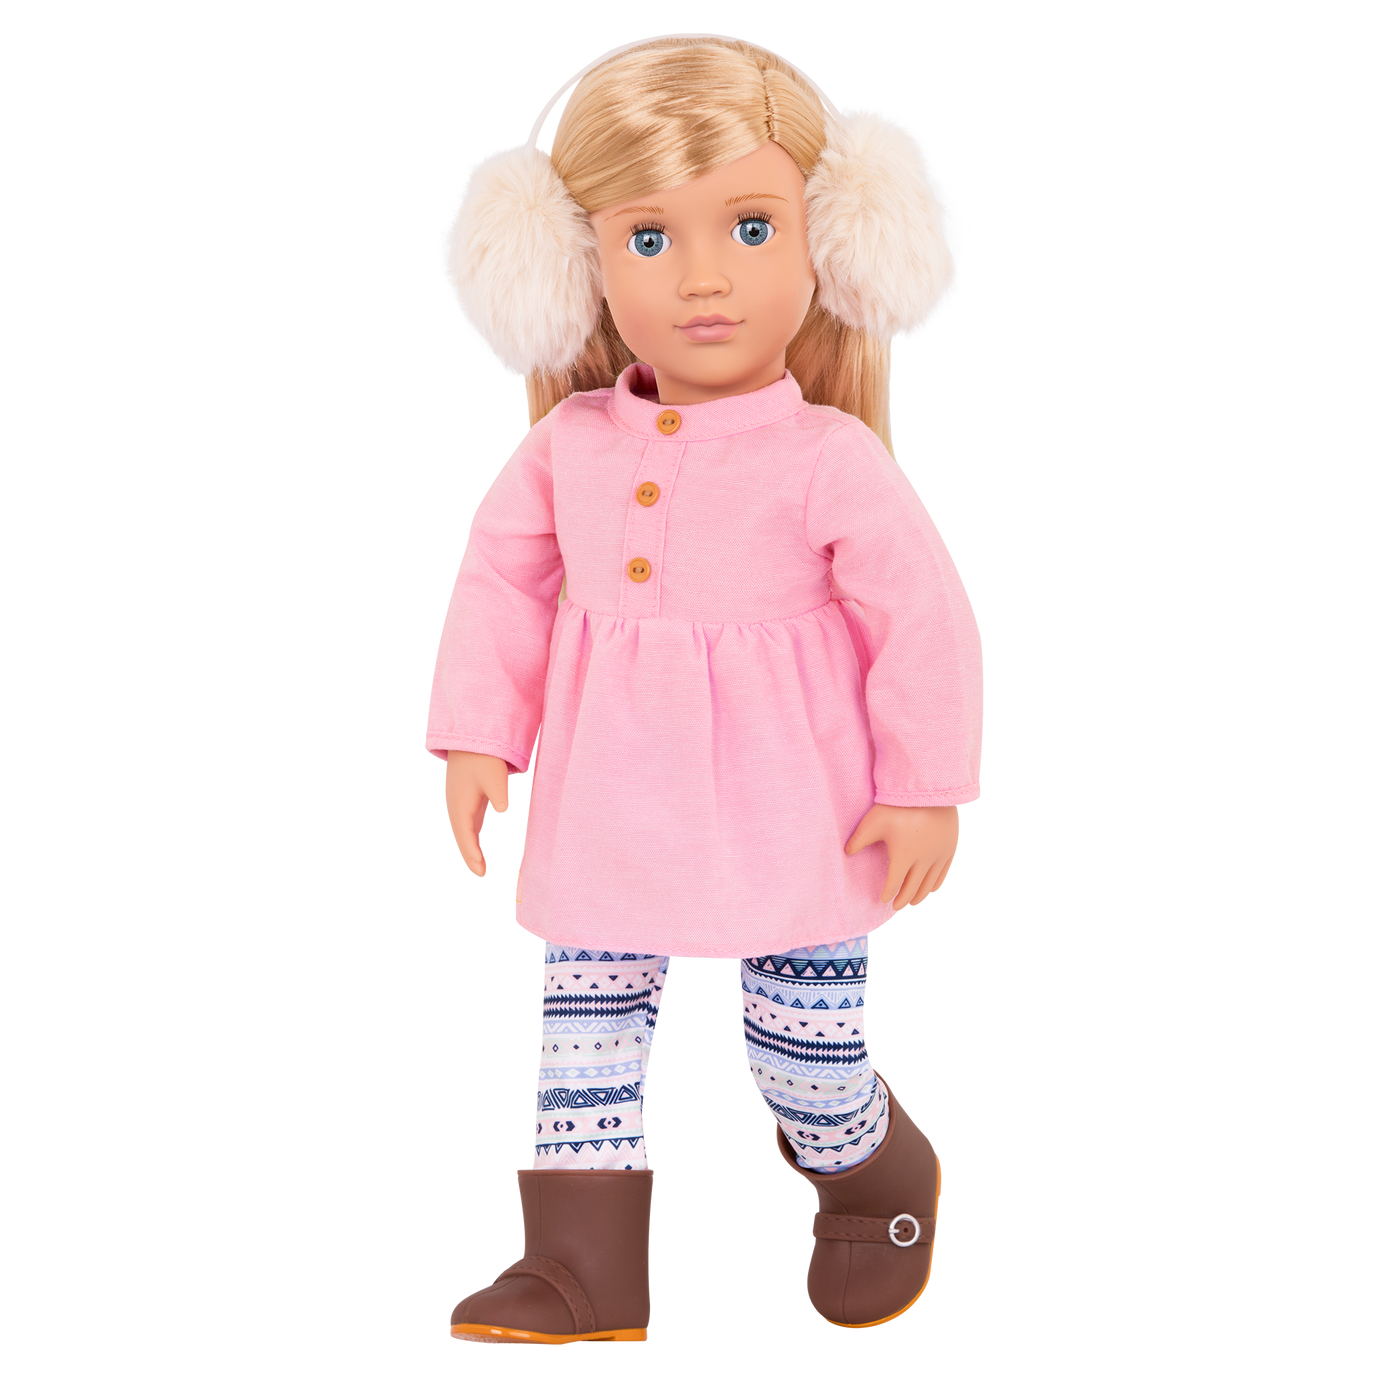 18-inch doll with blonde hair, blue eyes, winter outfits and storybook